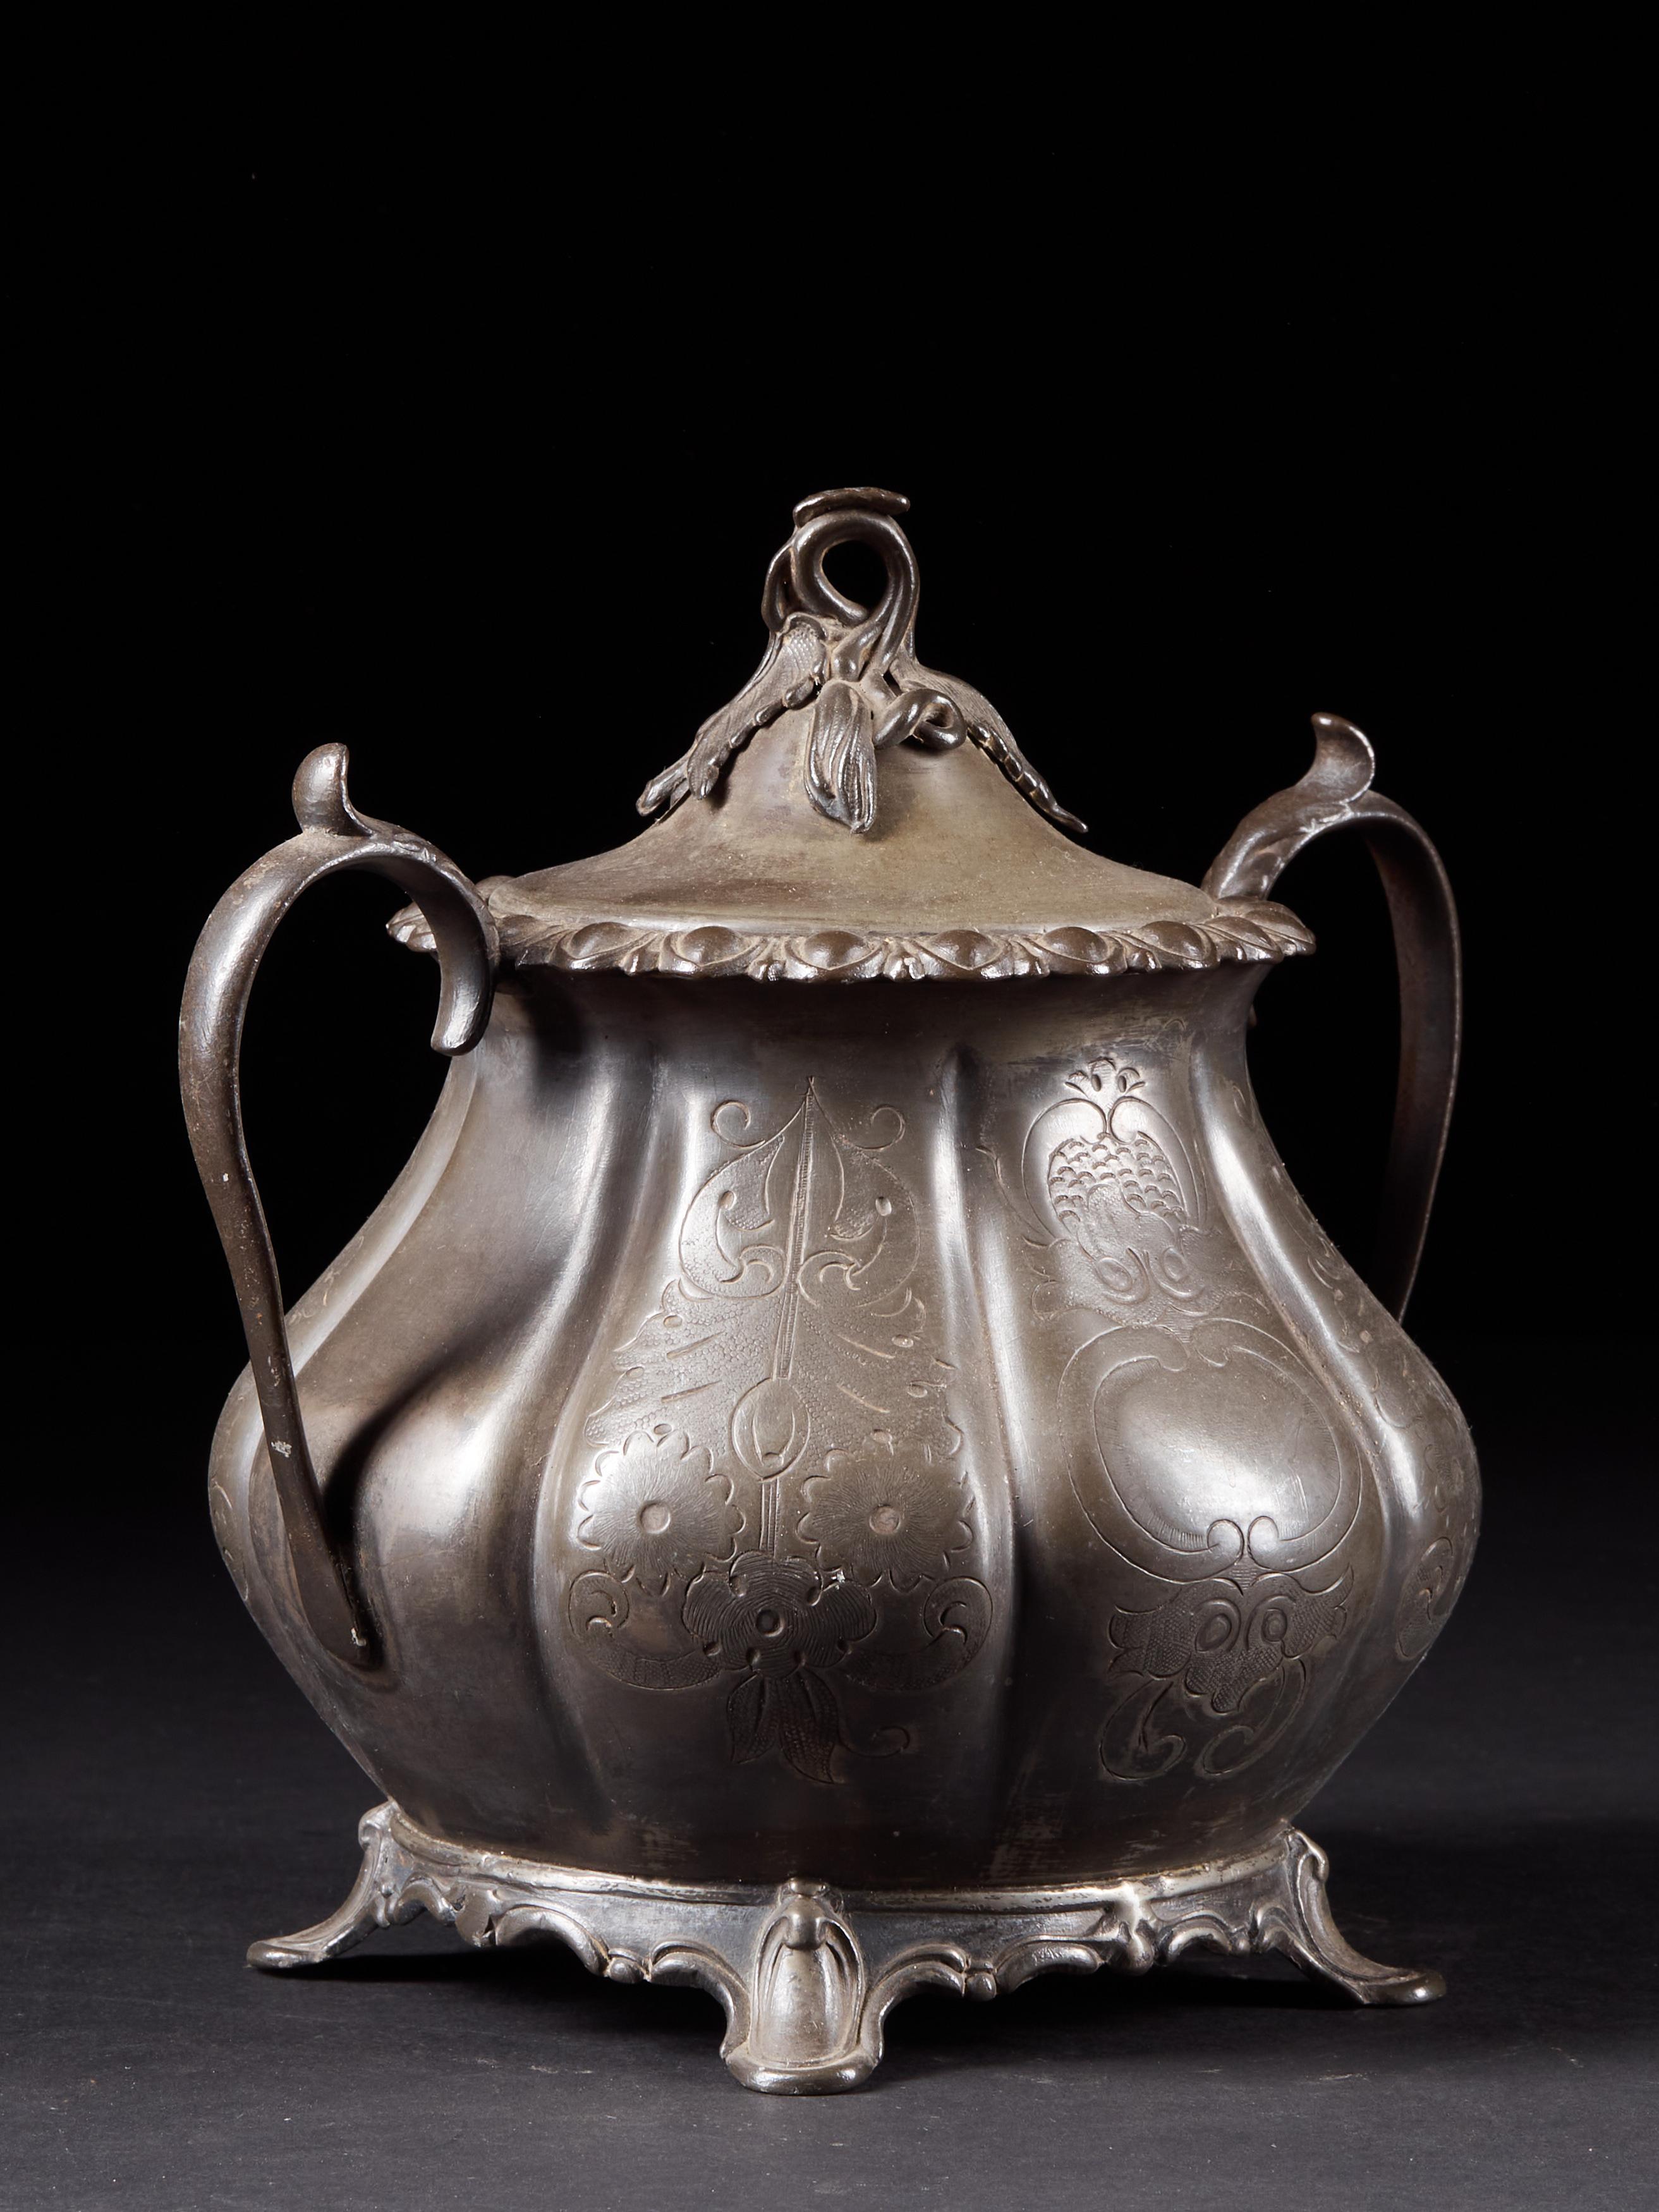 Pewter 19th Century, Elegant Sugar or Cream Pot with an Embossed Floral Pattern